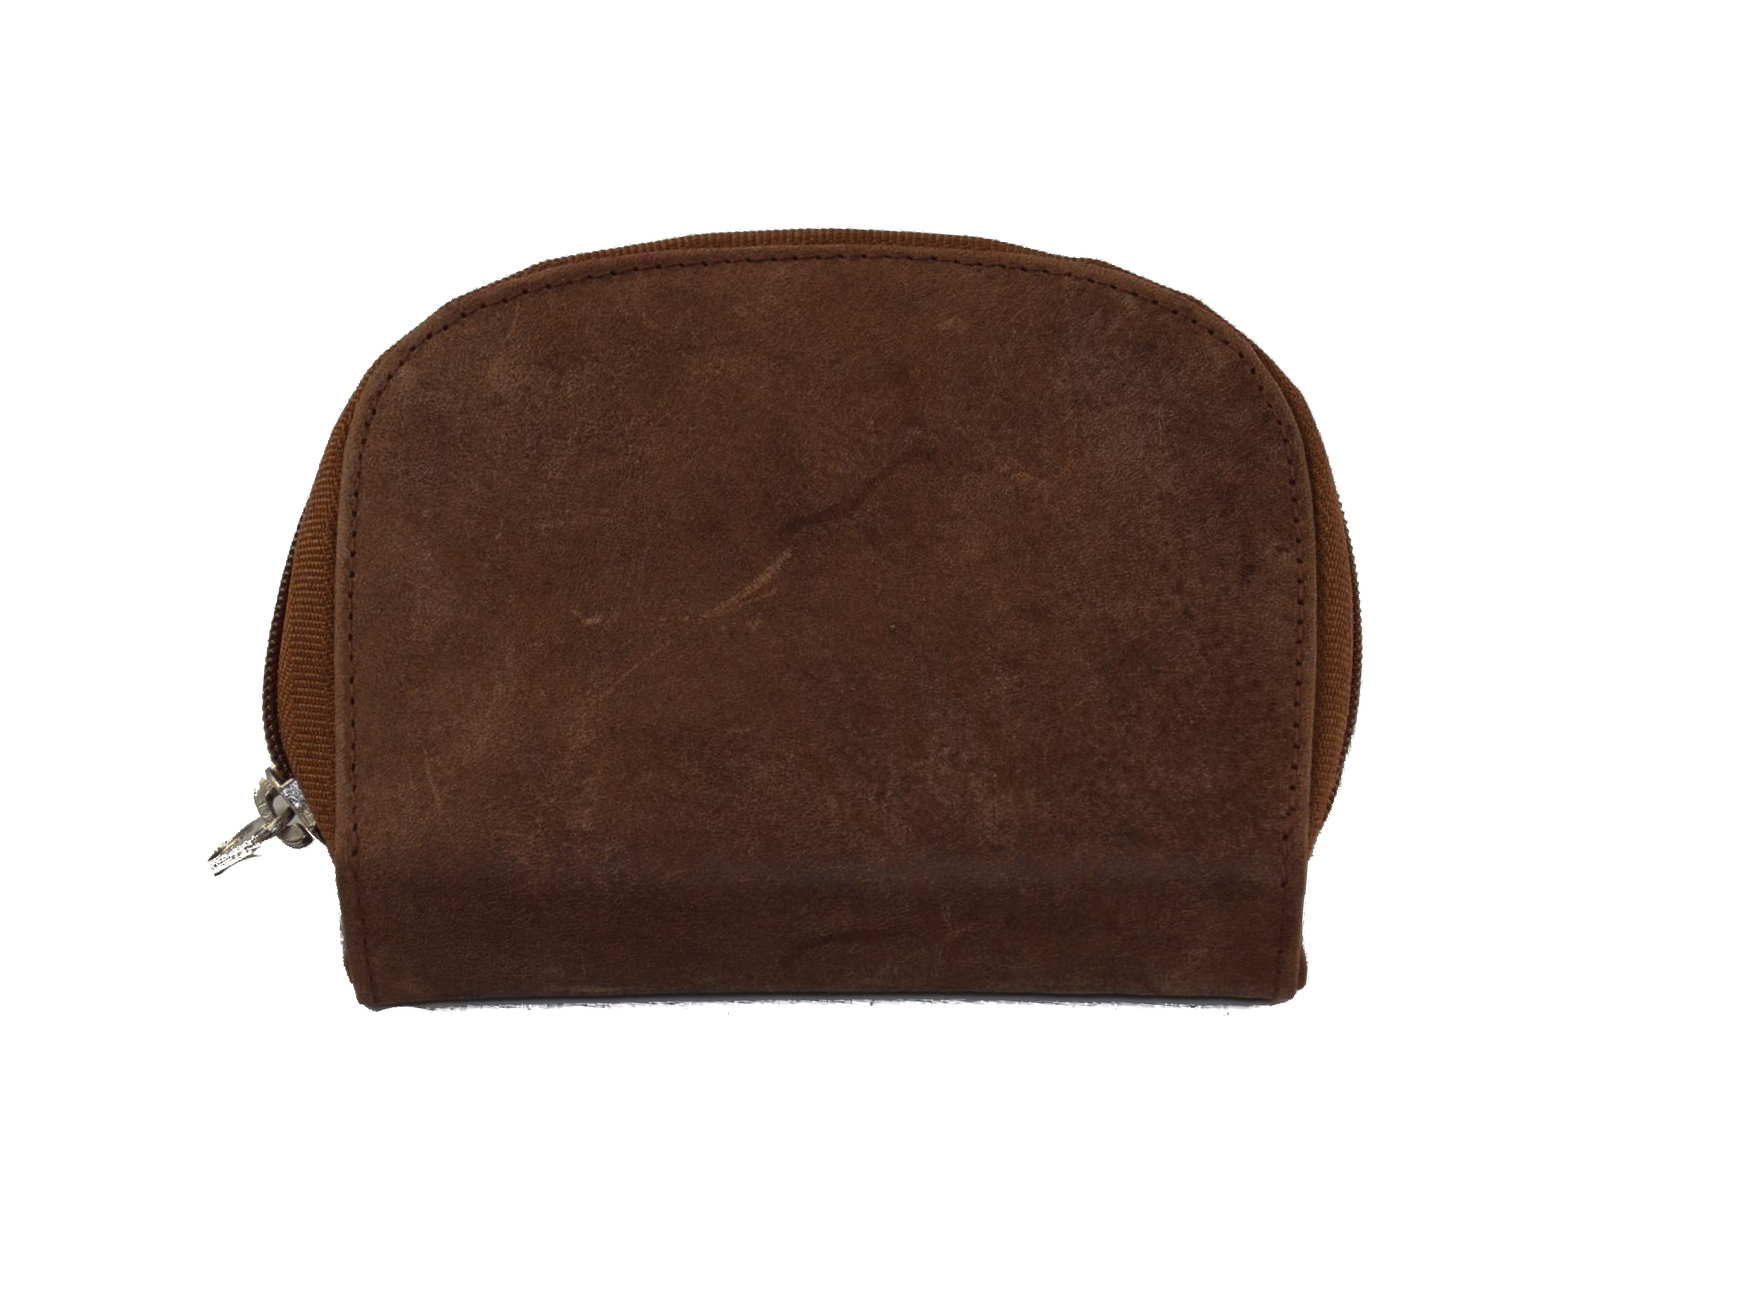 SuedeLeather Purse for Women 2114